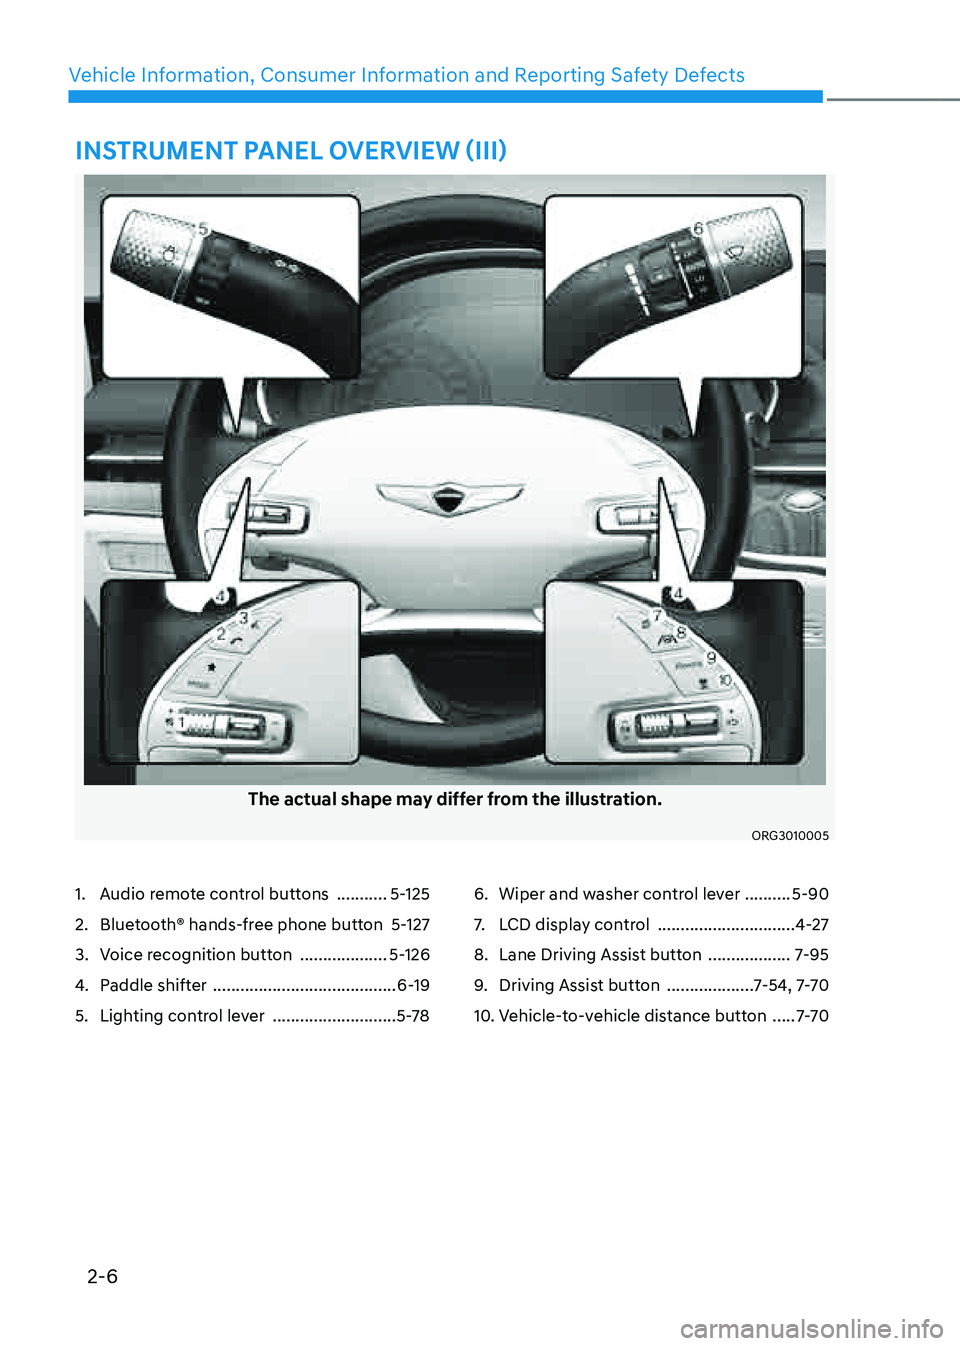 GENESIS G80 2021  Owners Manual 2-6
Vehicle Information, Consumer Information and Reporting Safety Defects
INSTRUMENT PANEL OVERVIEW (III)
The actual shape may differ from the illustration.
ORG3010005
1. Audio remote control buttons